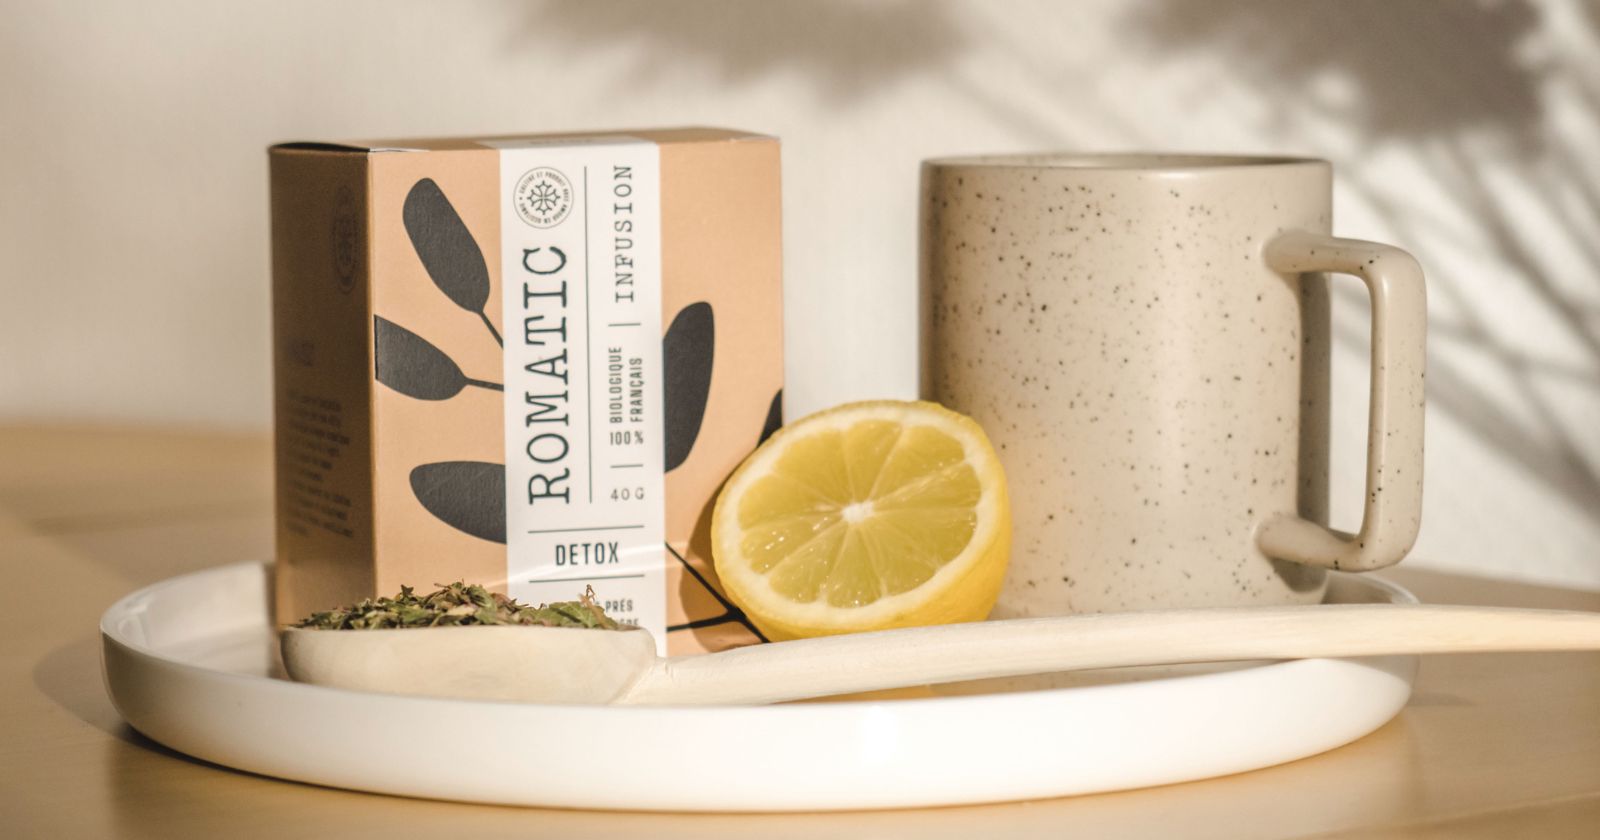 With its 100% French organic infusions, ROMATIC reveals the taste and benefits of plants